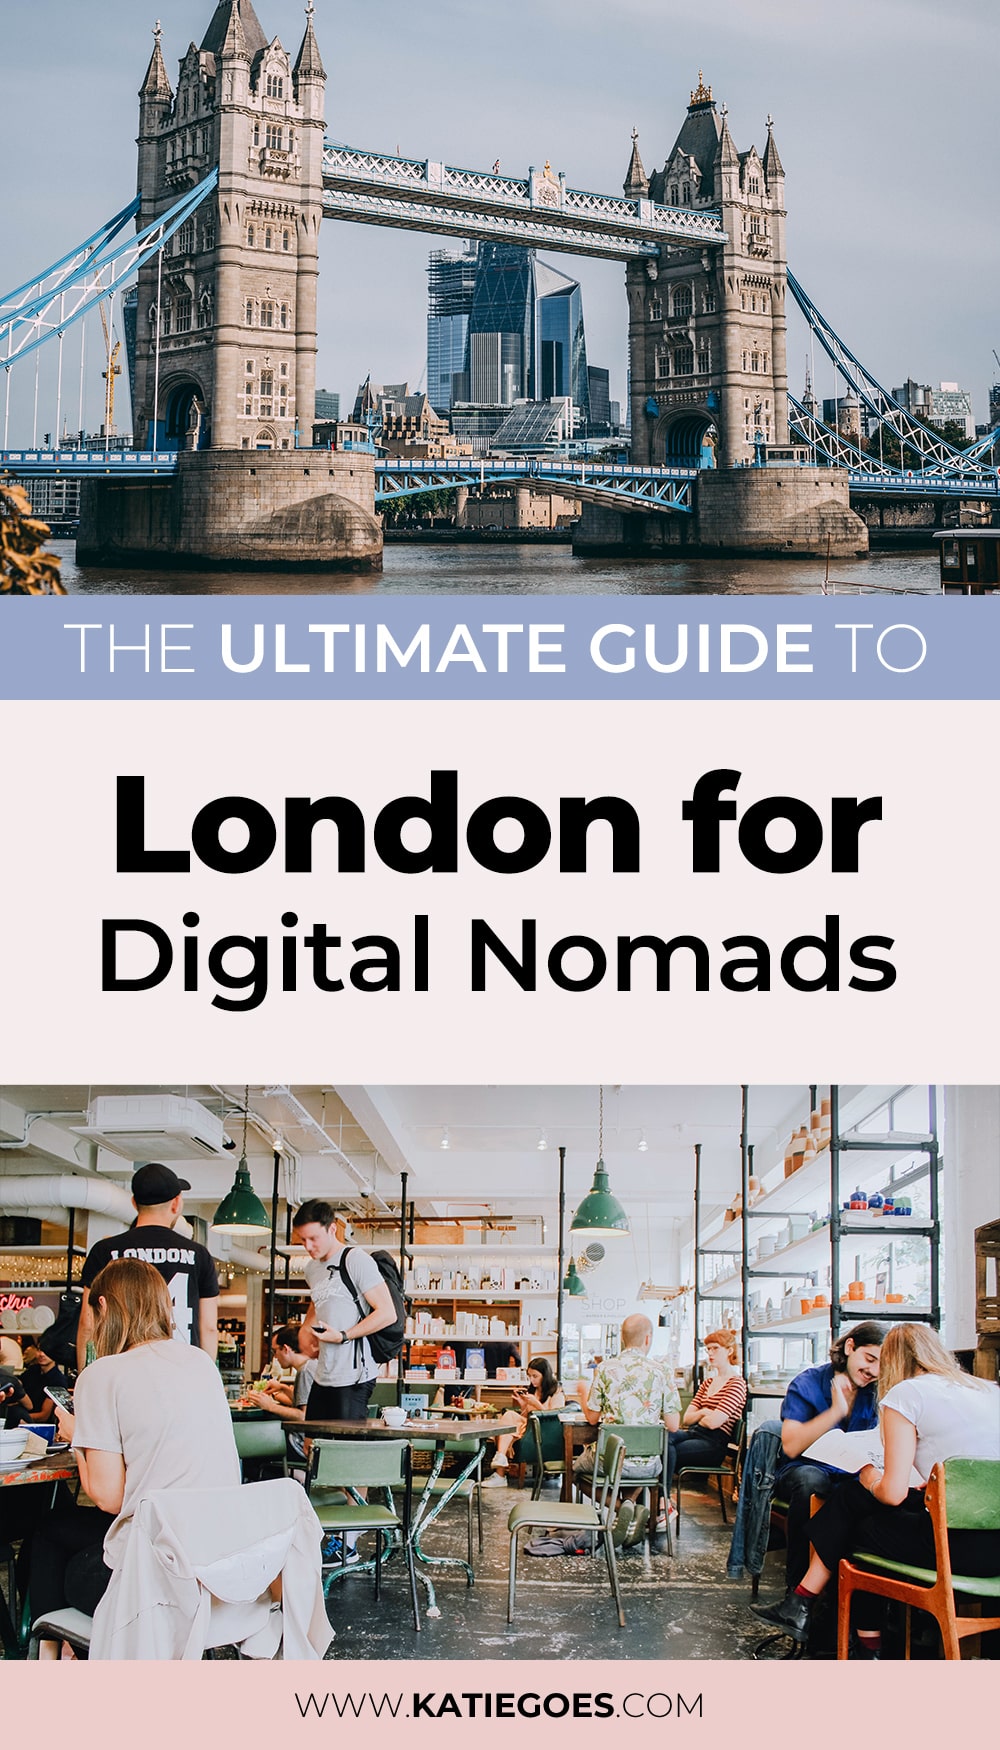 The Ultimate Guide to London for Digital Nomads